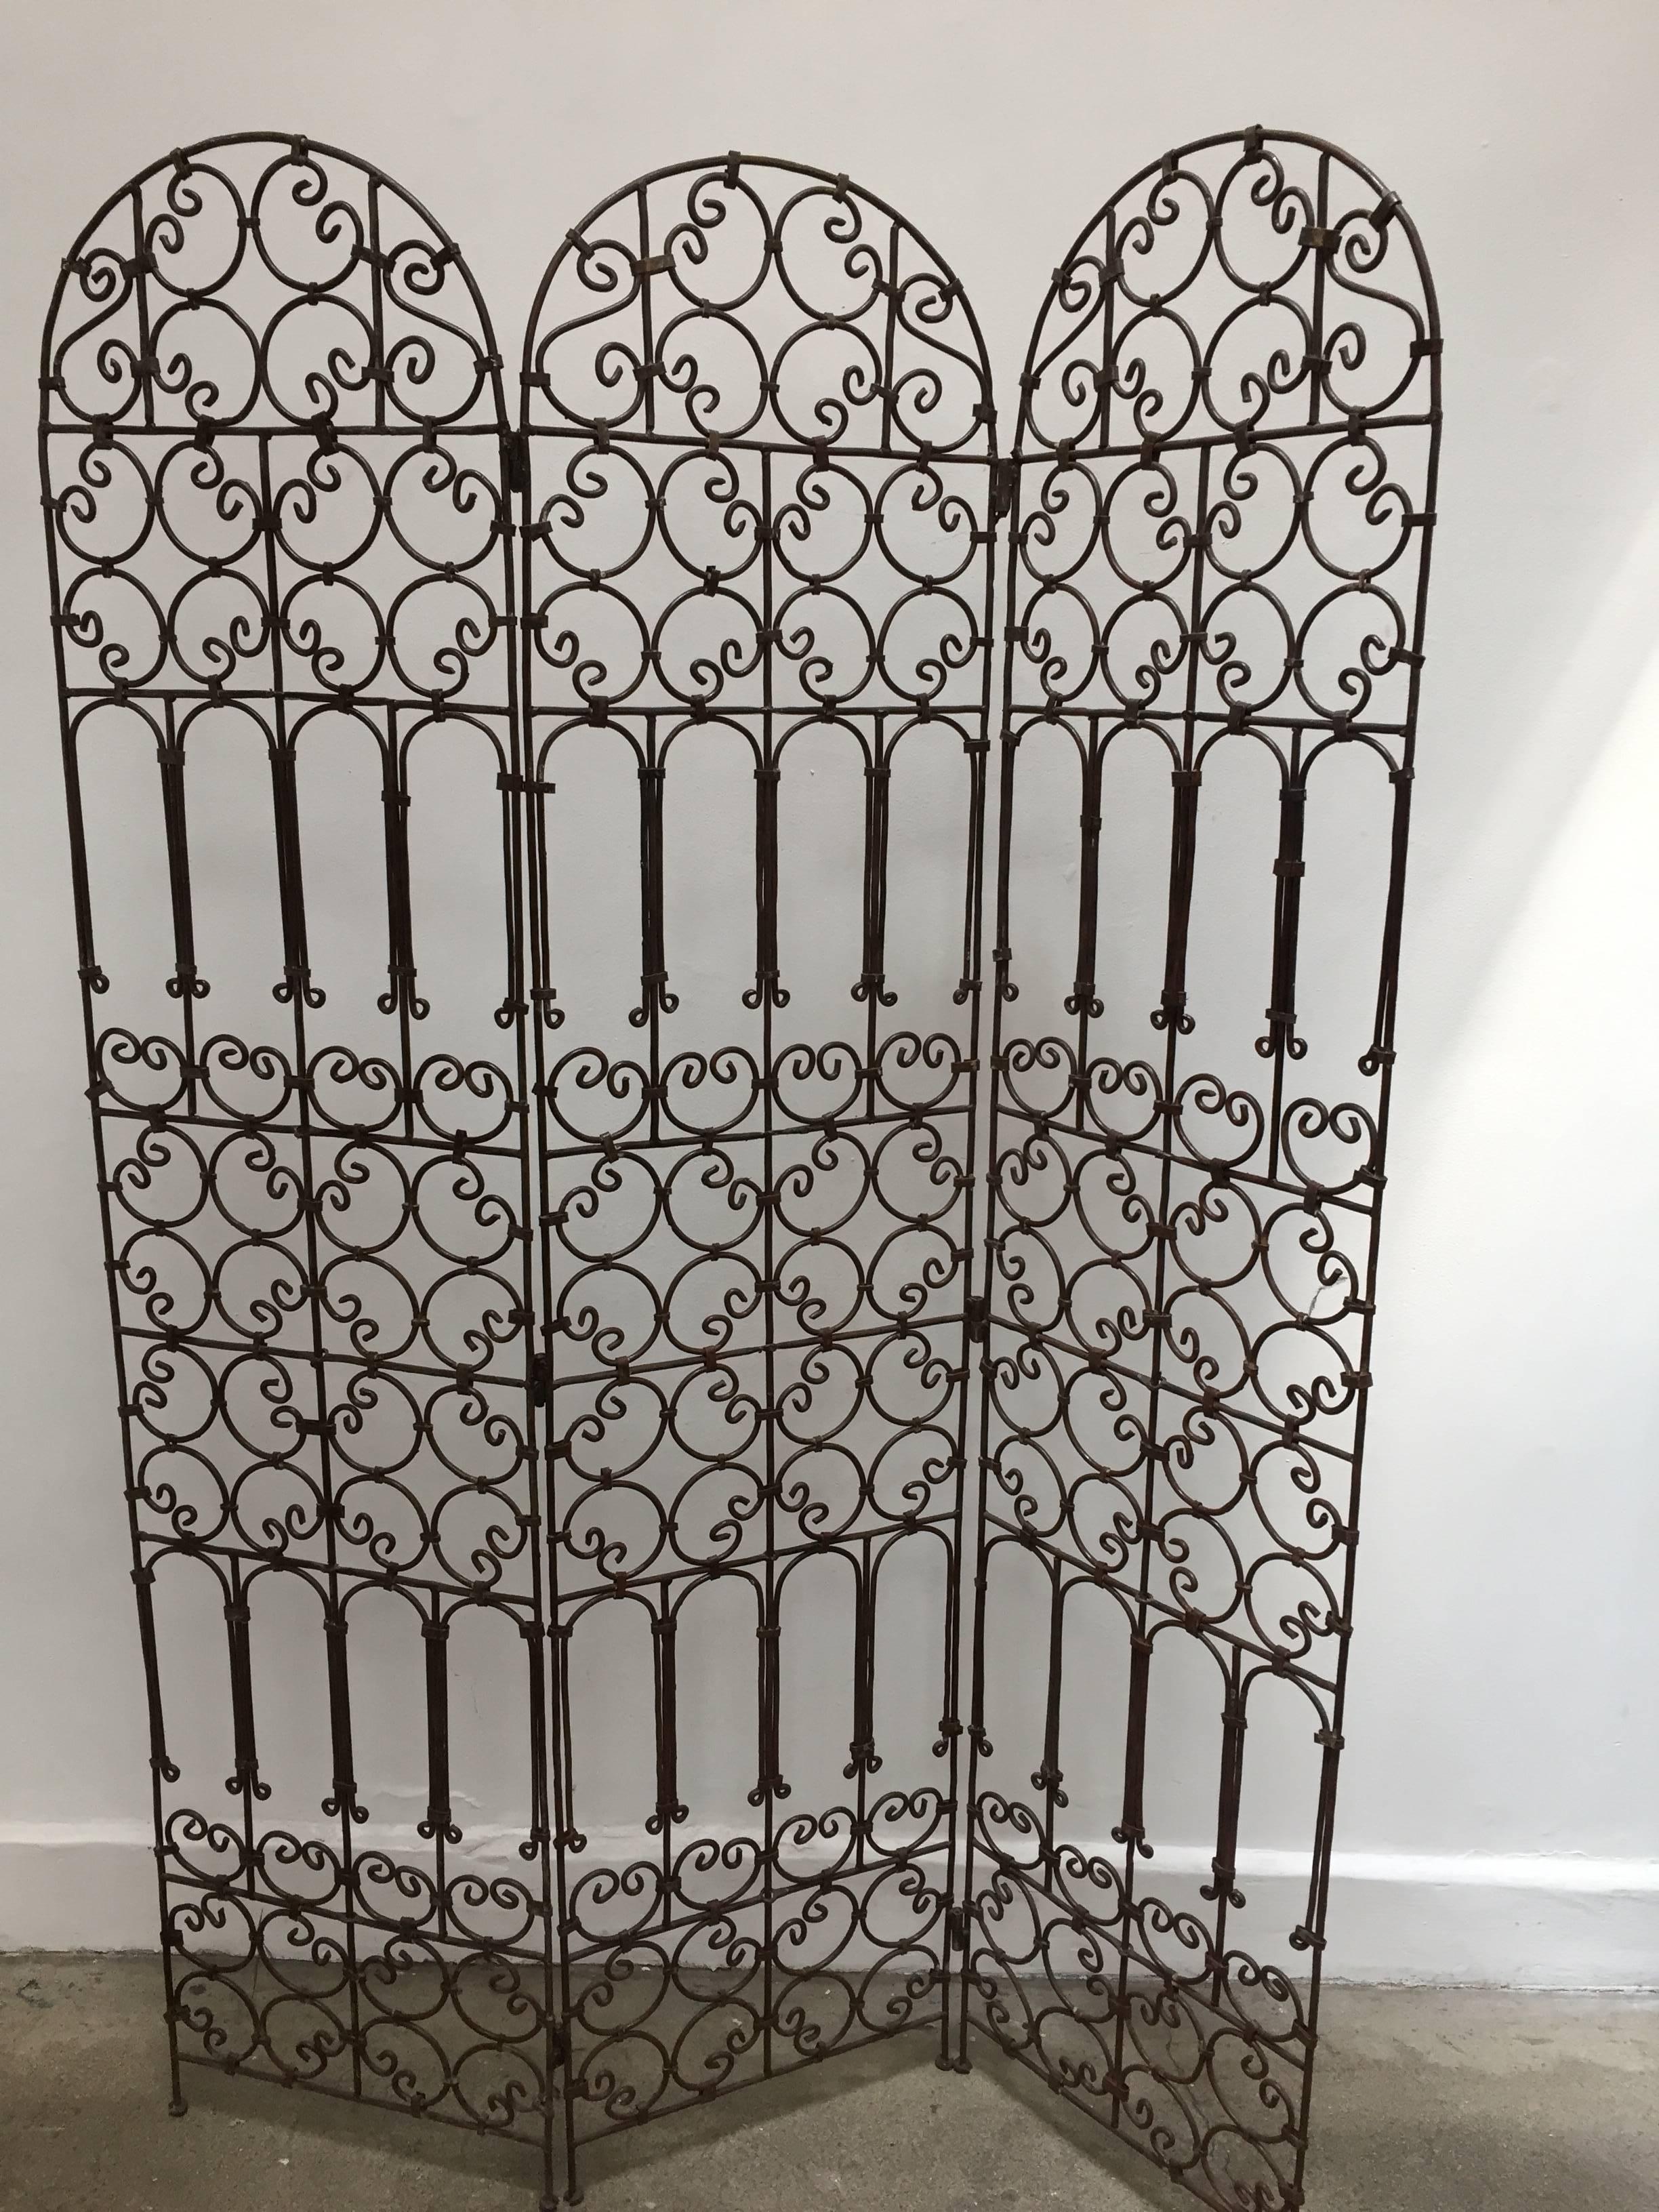 Hand-forged folding Moroccan screen with three panels decorated with Moorish designs.
Classic and elegant Art & Craft this highly embellished, detailed folding screen divider in the Mediterranean Spanish style would embellish any room, garden or